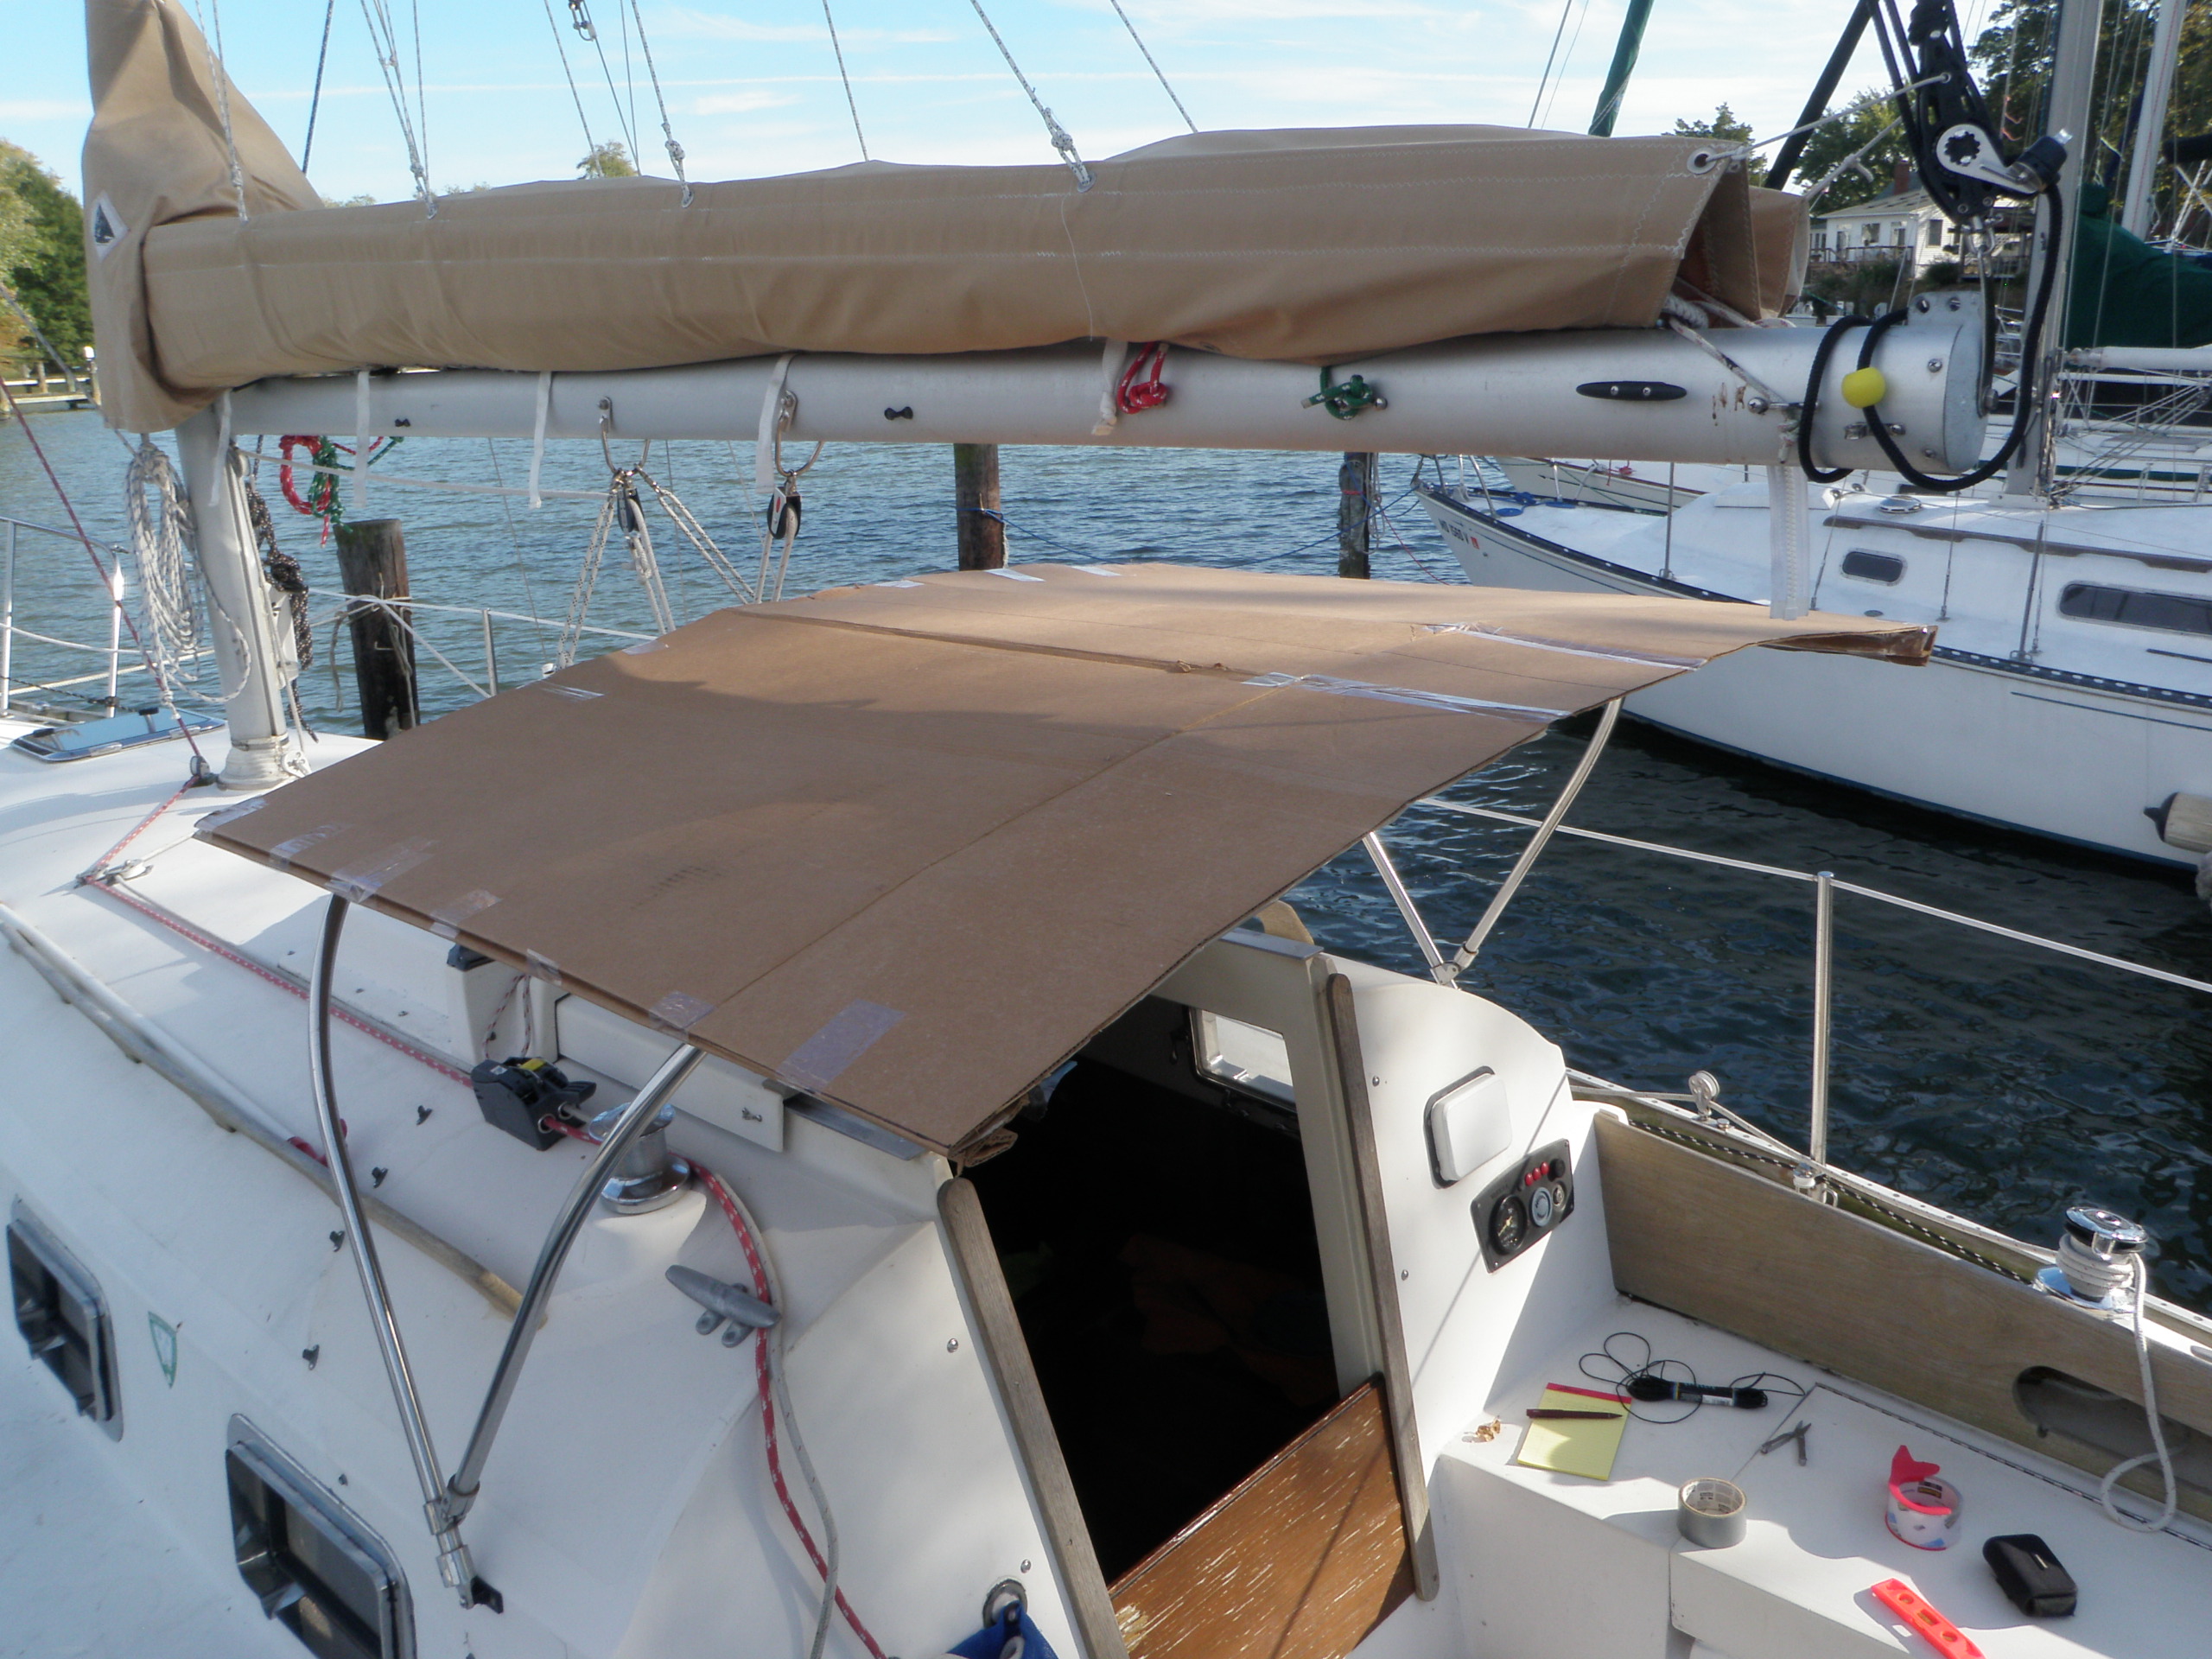 Topic How to build a sailboat dodger Inside the plan